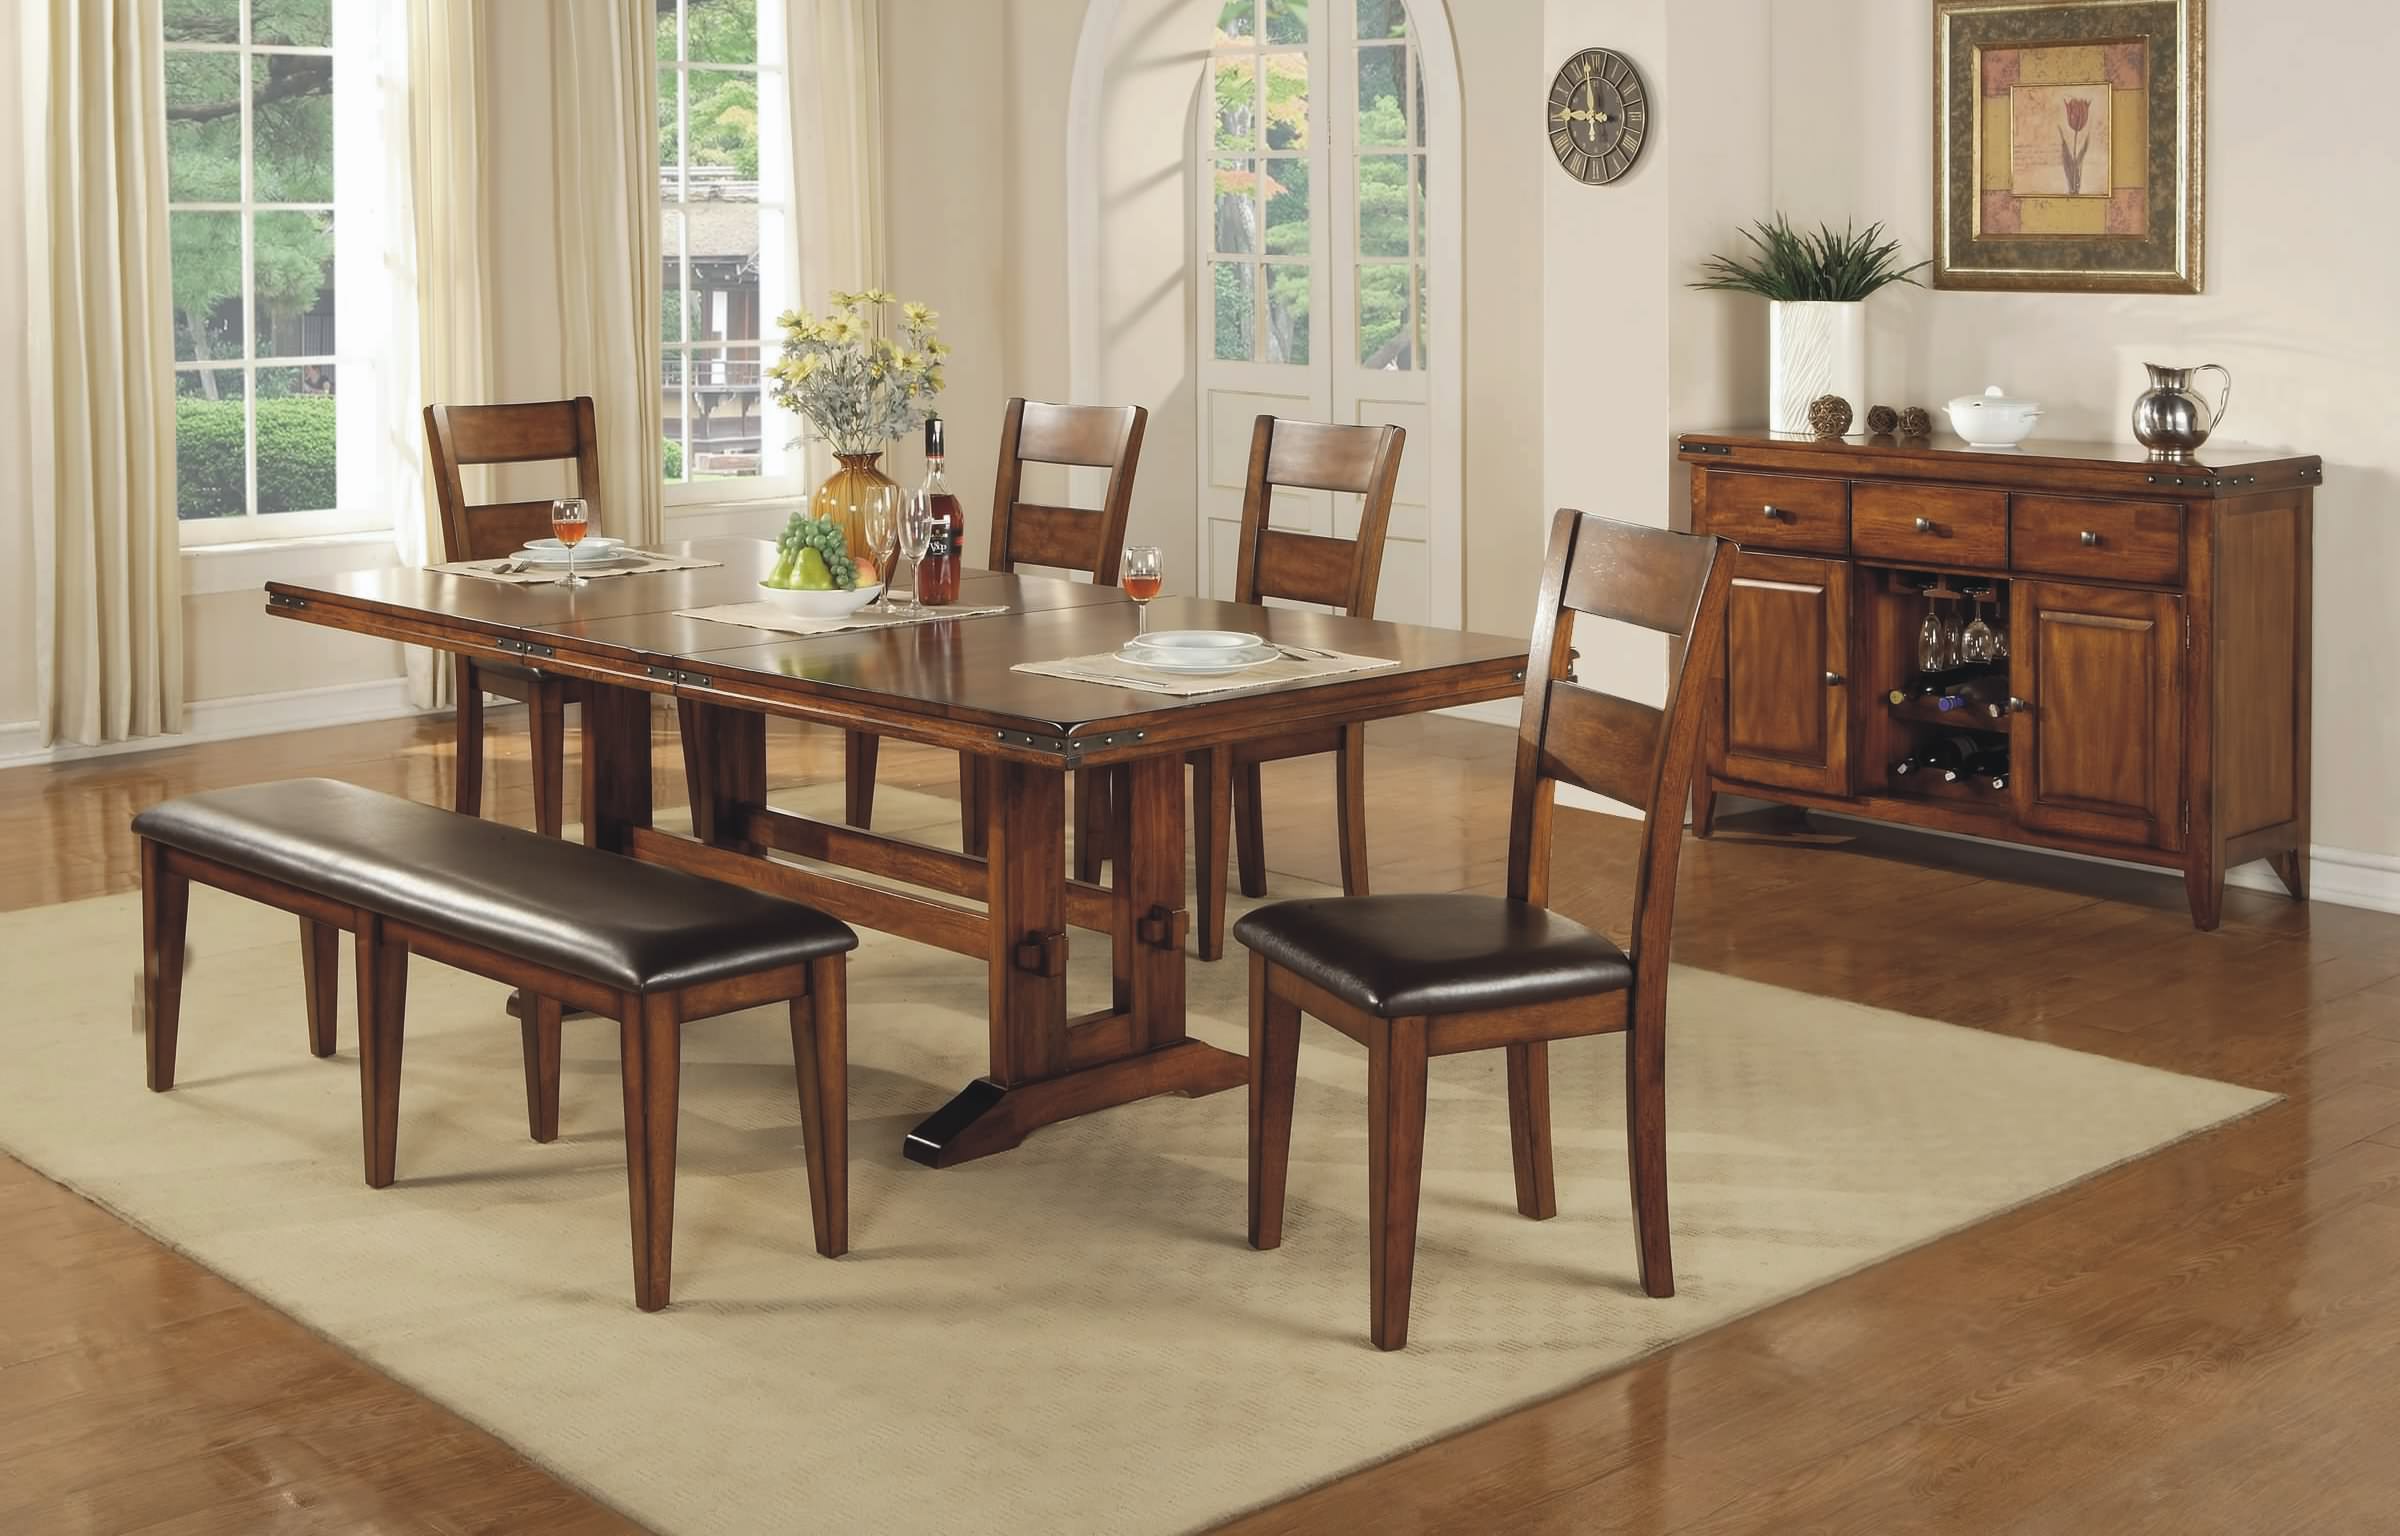 Buy Mango Dining Table Online in Surrey, Vancouver, North Vancouver